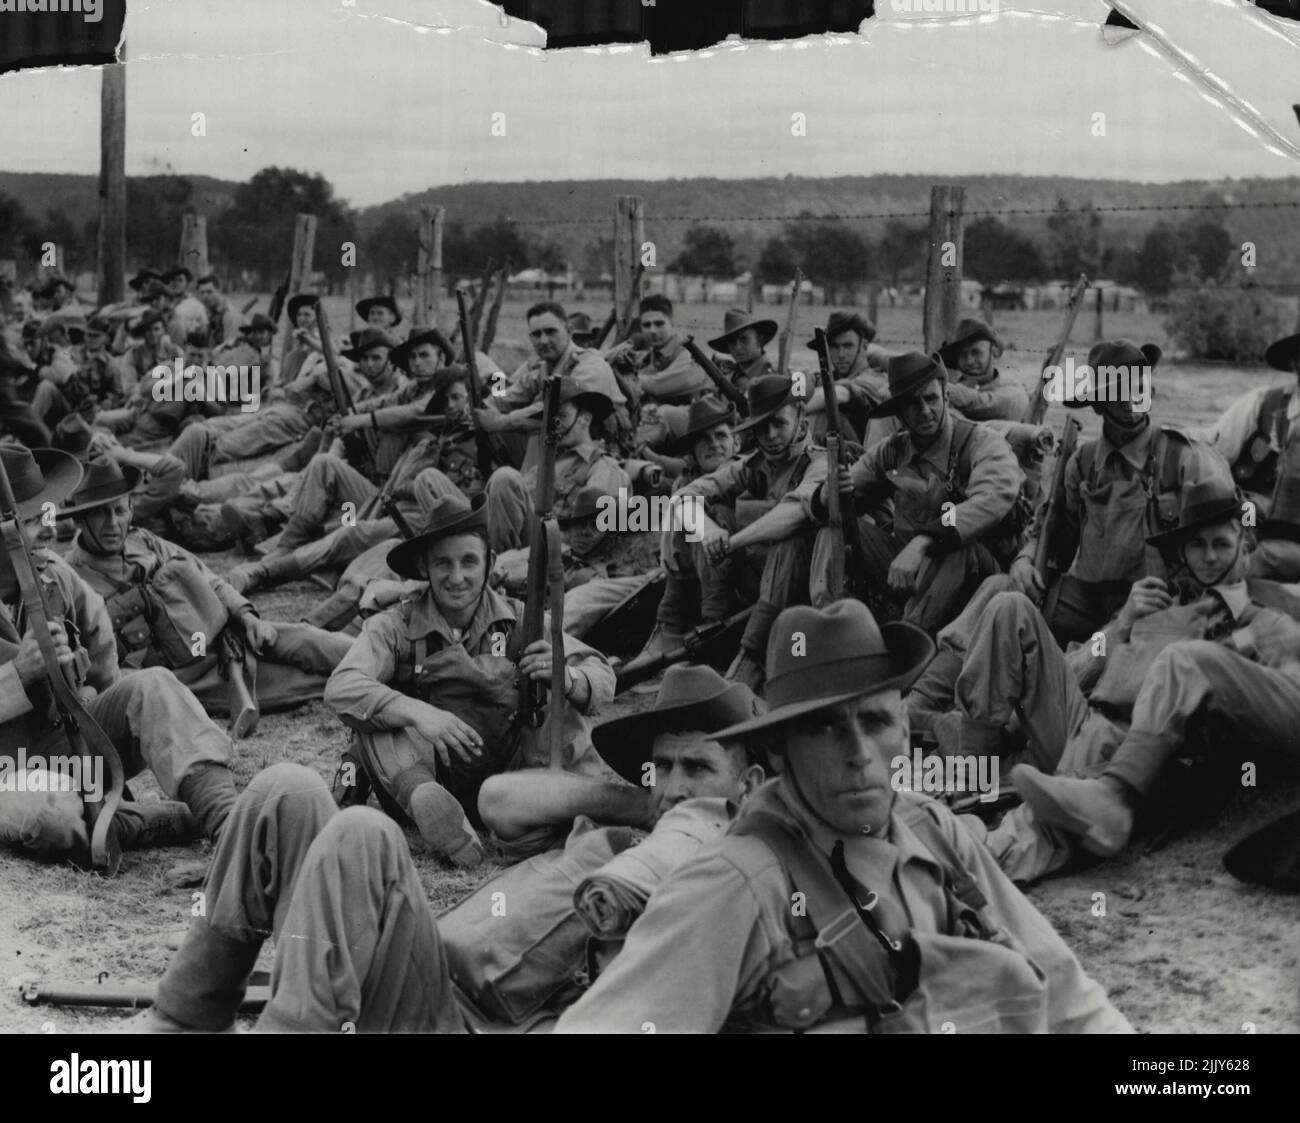 Engineers the laziest for the march resting on ***** Tenneth today. August 26, 1940. Stock Photo